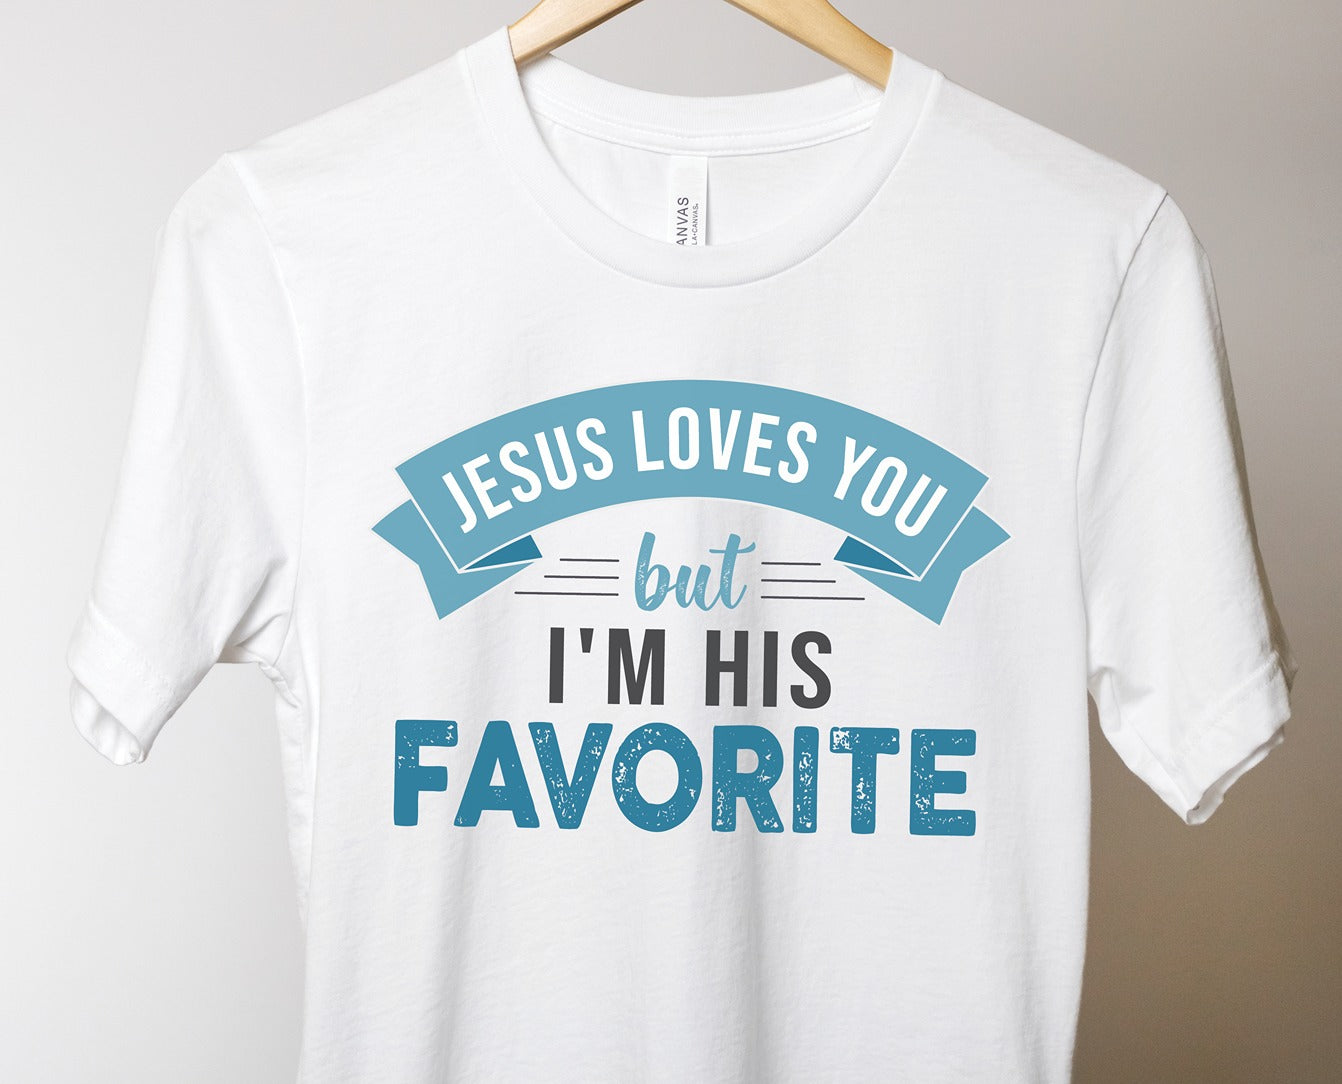 Jesus Loves You But I'm His Favorite funny religious Christian aesthetic adult size t-shirt printed in teal on soft white unisex tee for women & men